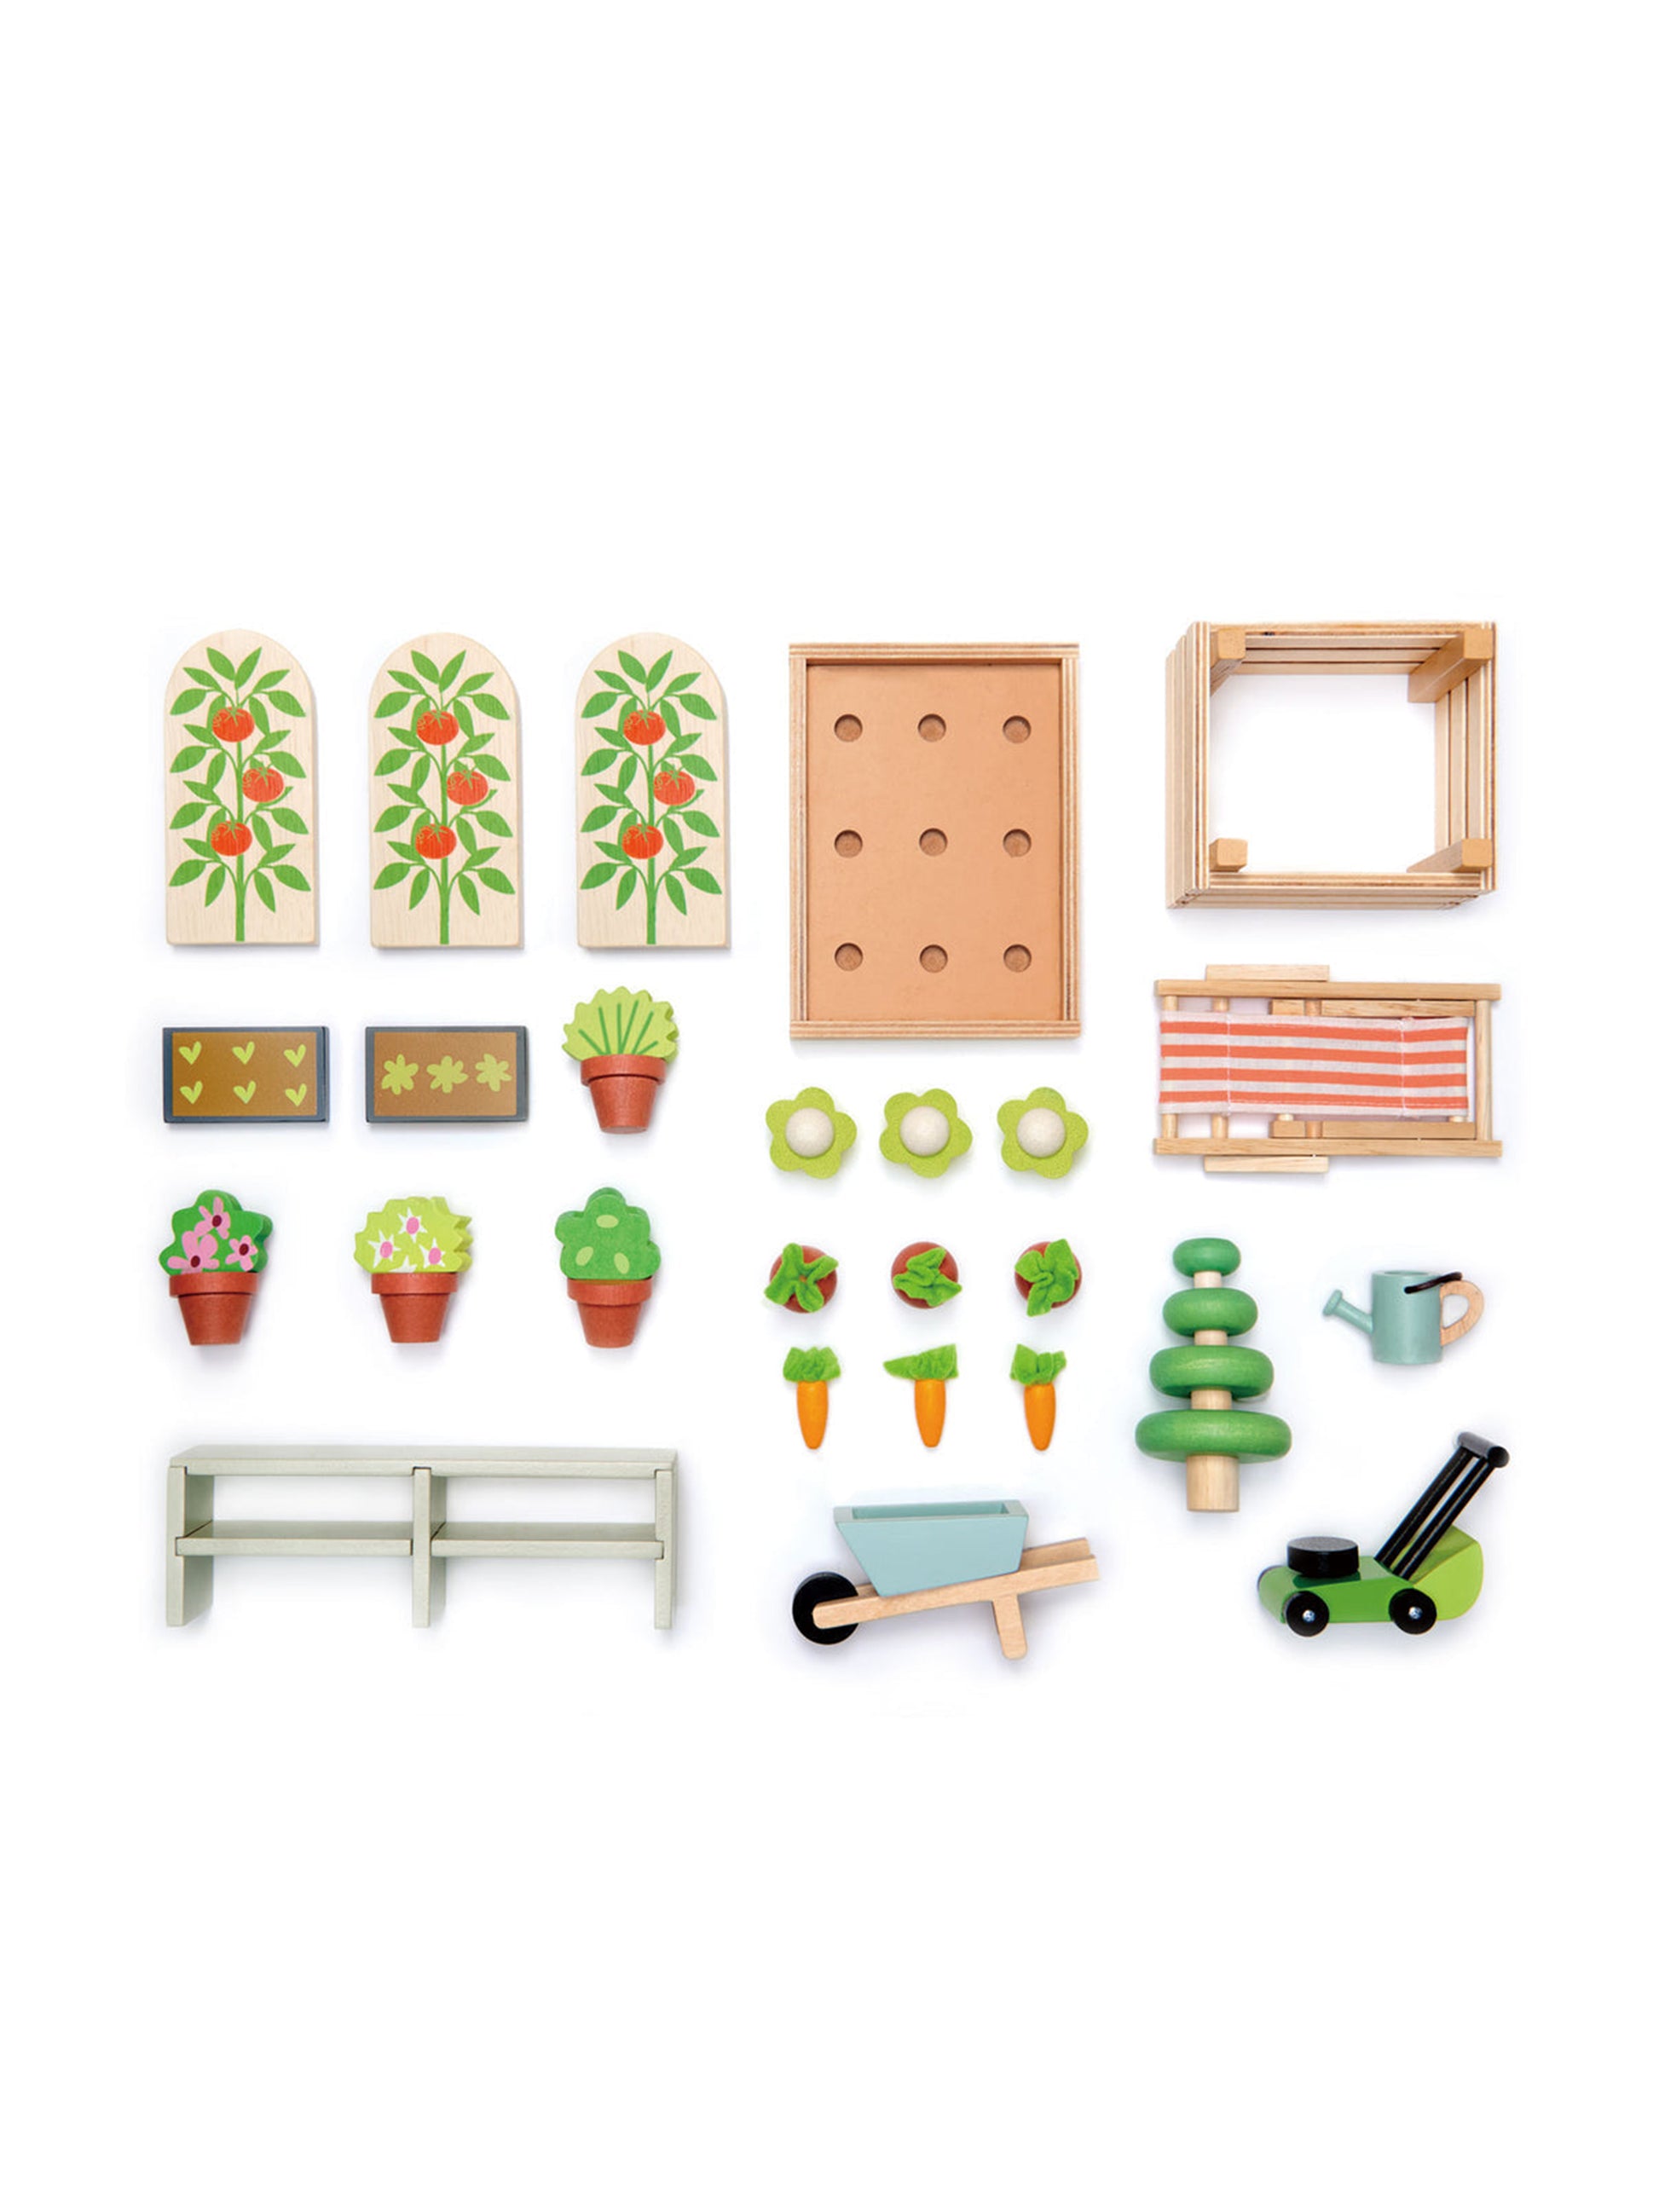 Tender Leaf Toys Greenhouse and Garden Set Weston Table